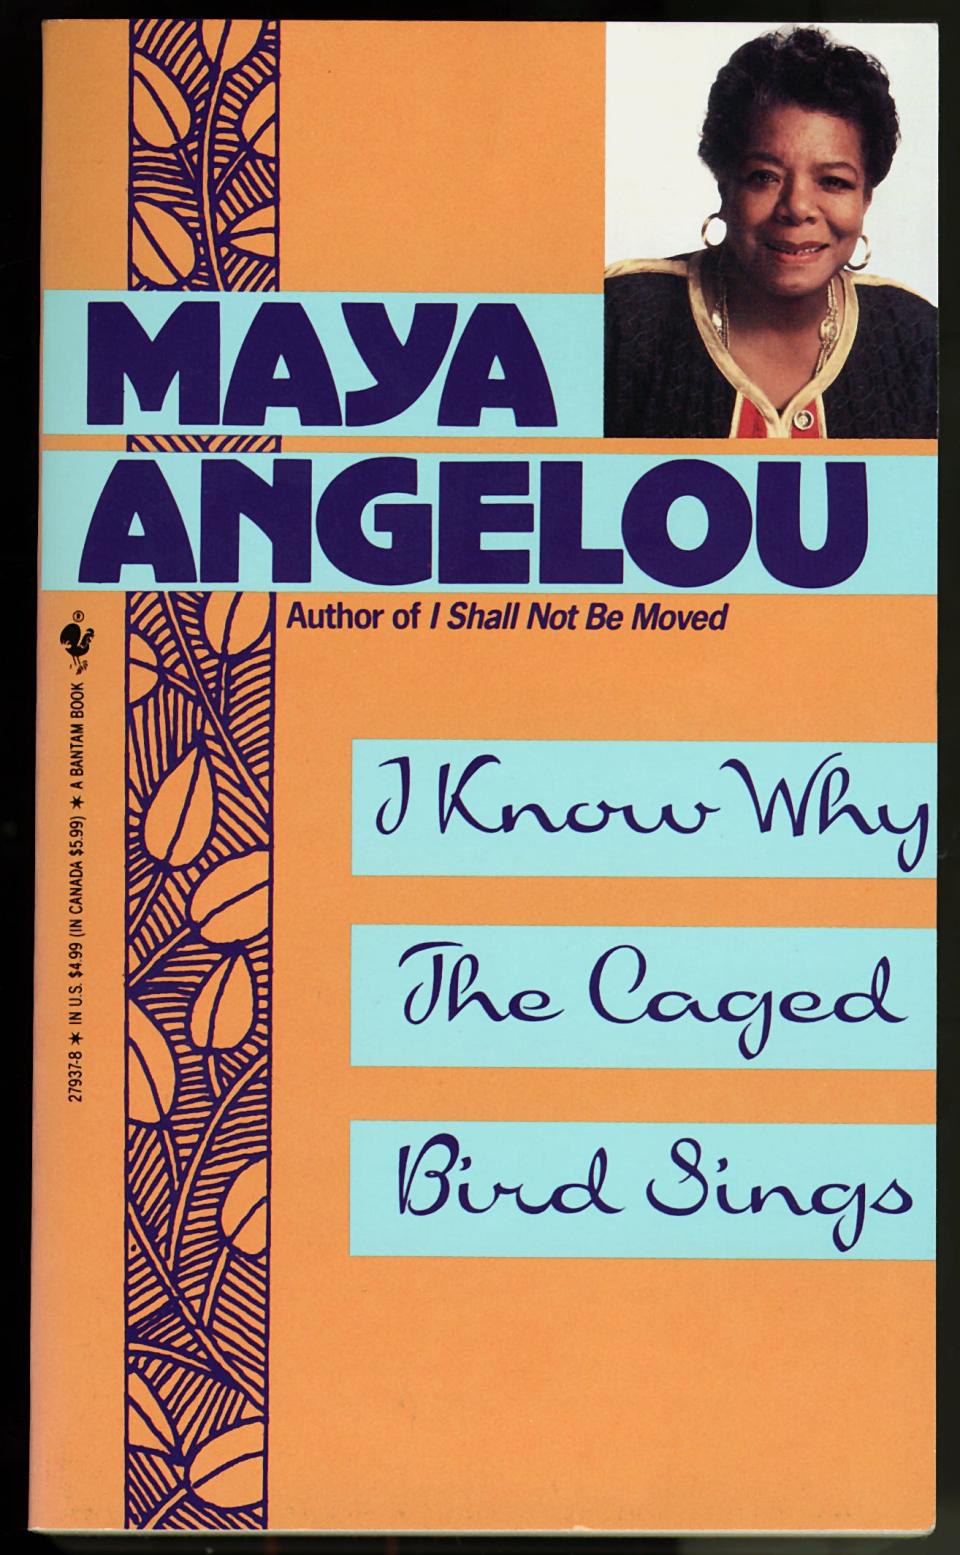 "I Know Why the Caged Bird Sings"  by Maya Angelou.